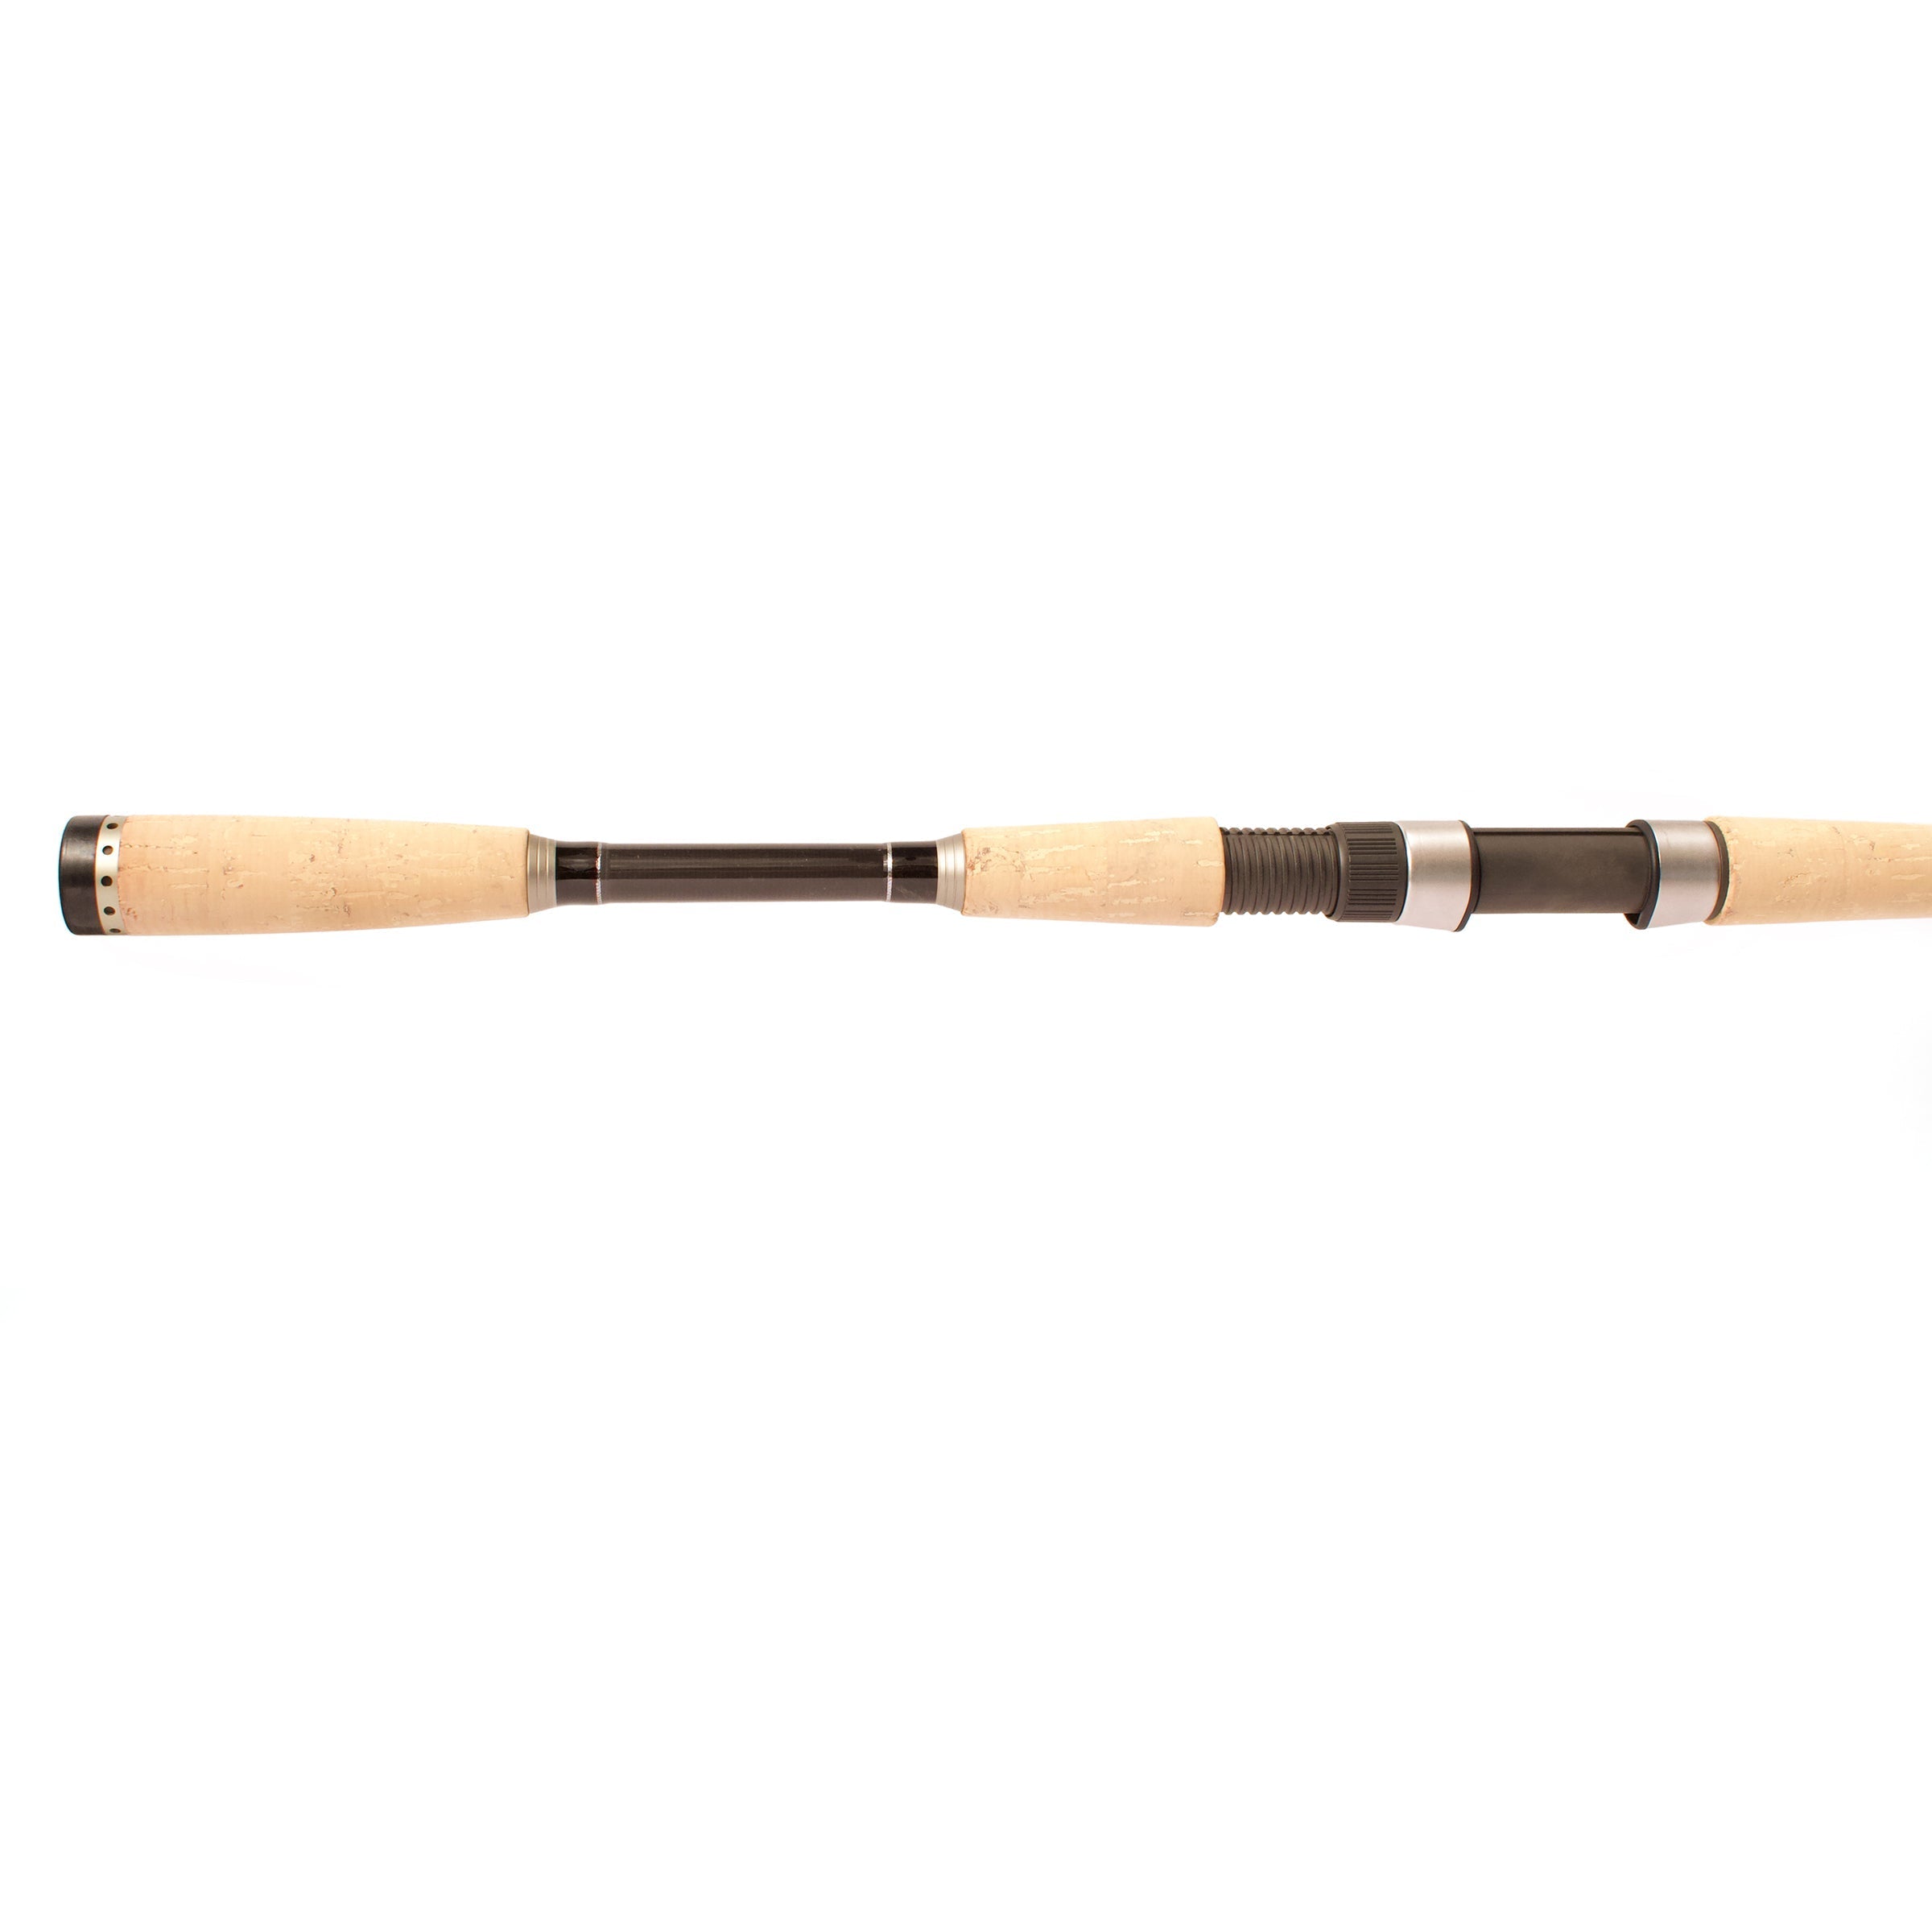 FISHING ROD REVIEW Star Rods Fishing Rods Review Stellar Lite and Surf  Series Fishing Rods 